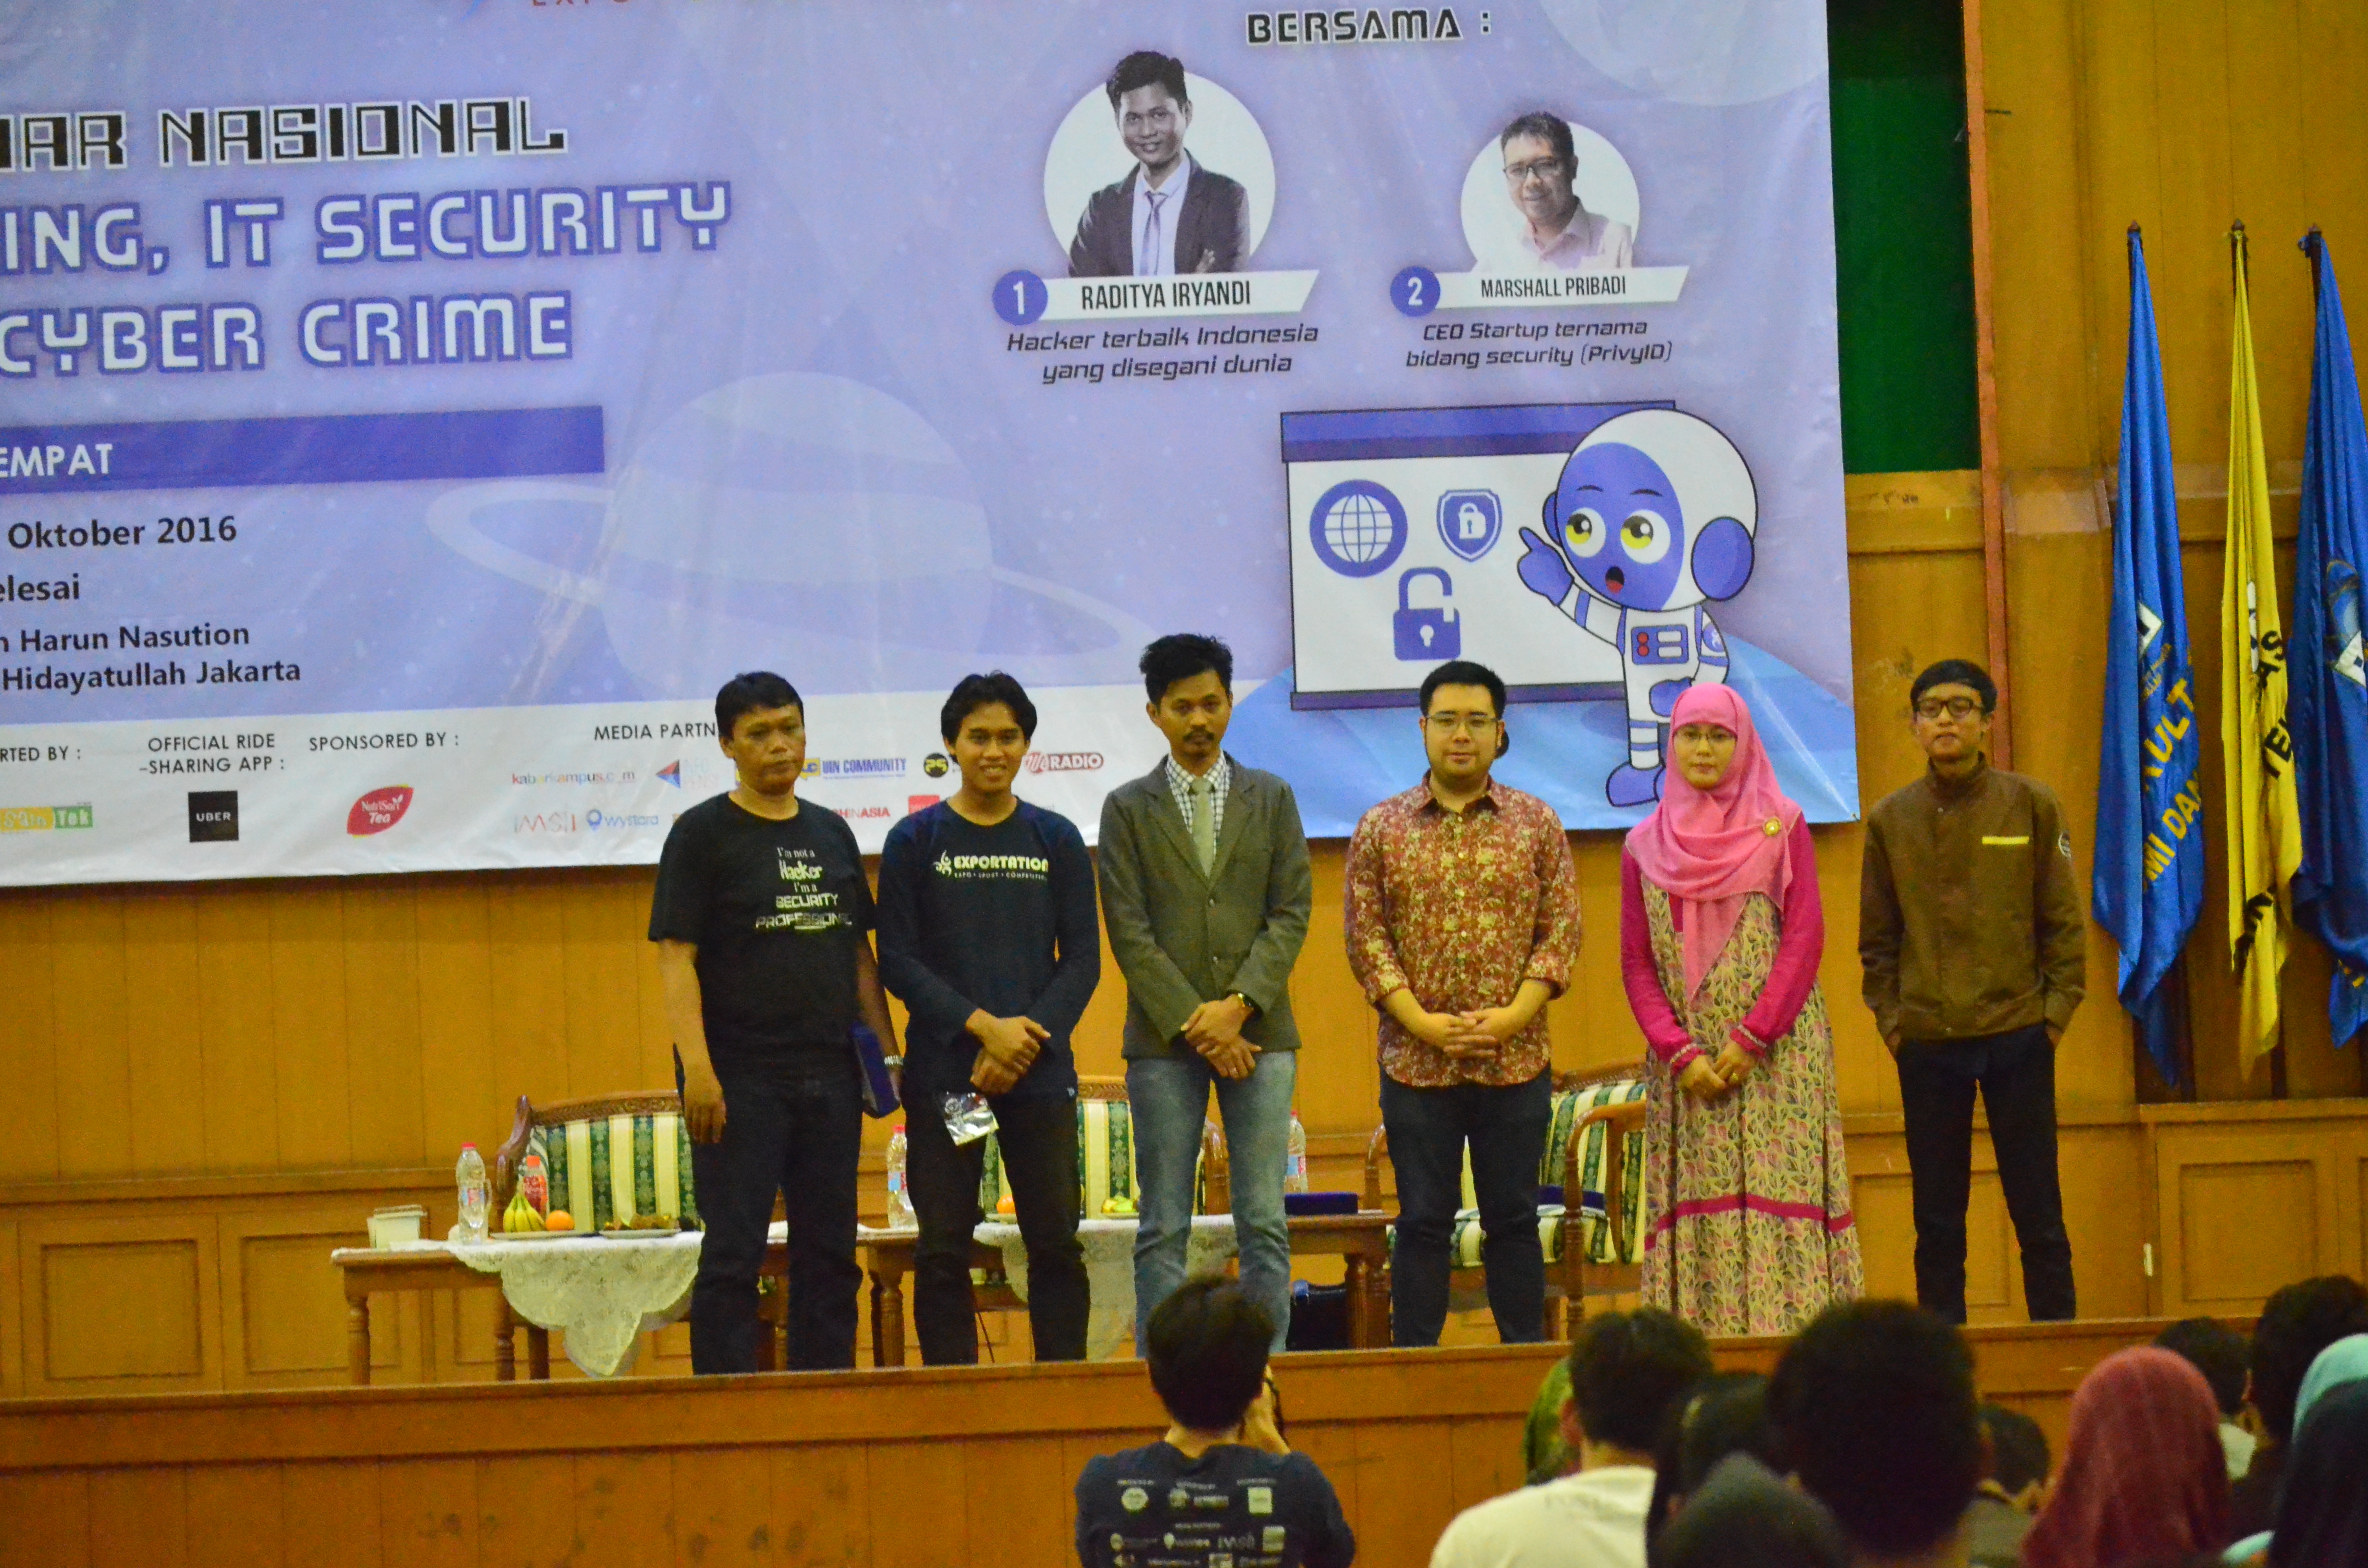 Seminar Nasional “Hacking, IT Security, and Cyber Crime”